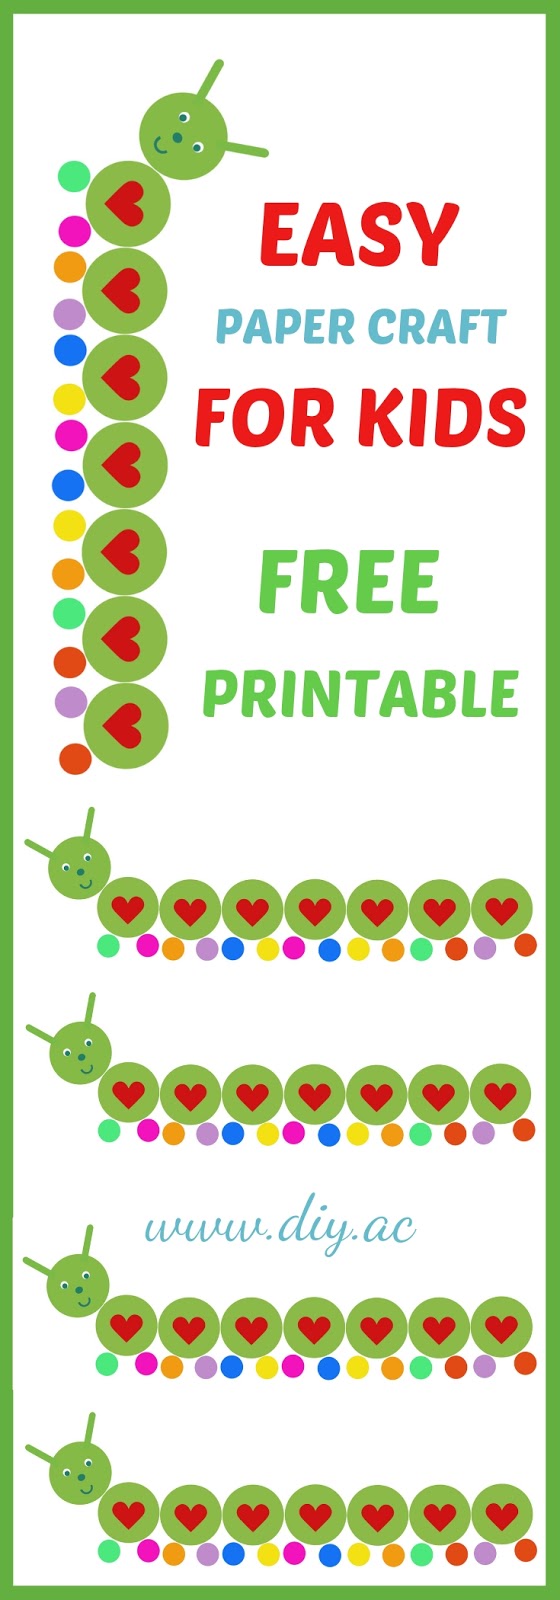 EASY CRAFT FOR KIDS WITH FREE PRINTABLE - THE VERY FRIENDLY CATERPILLAR